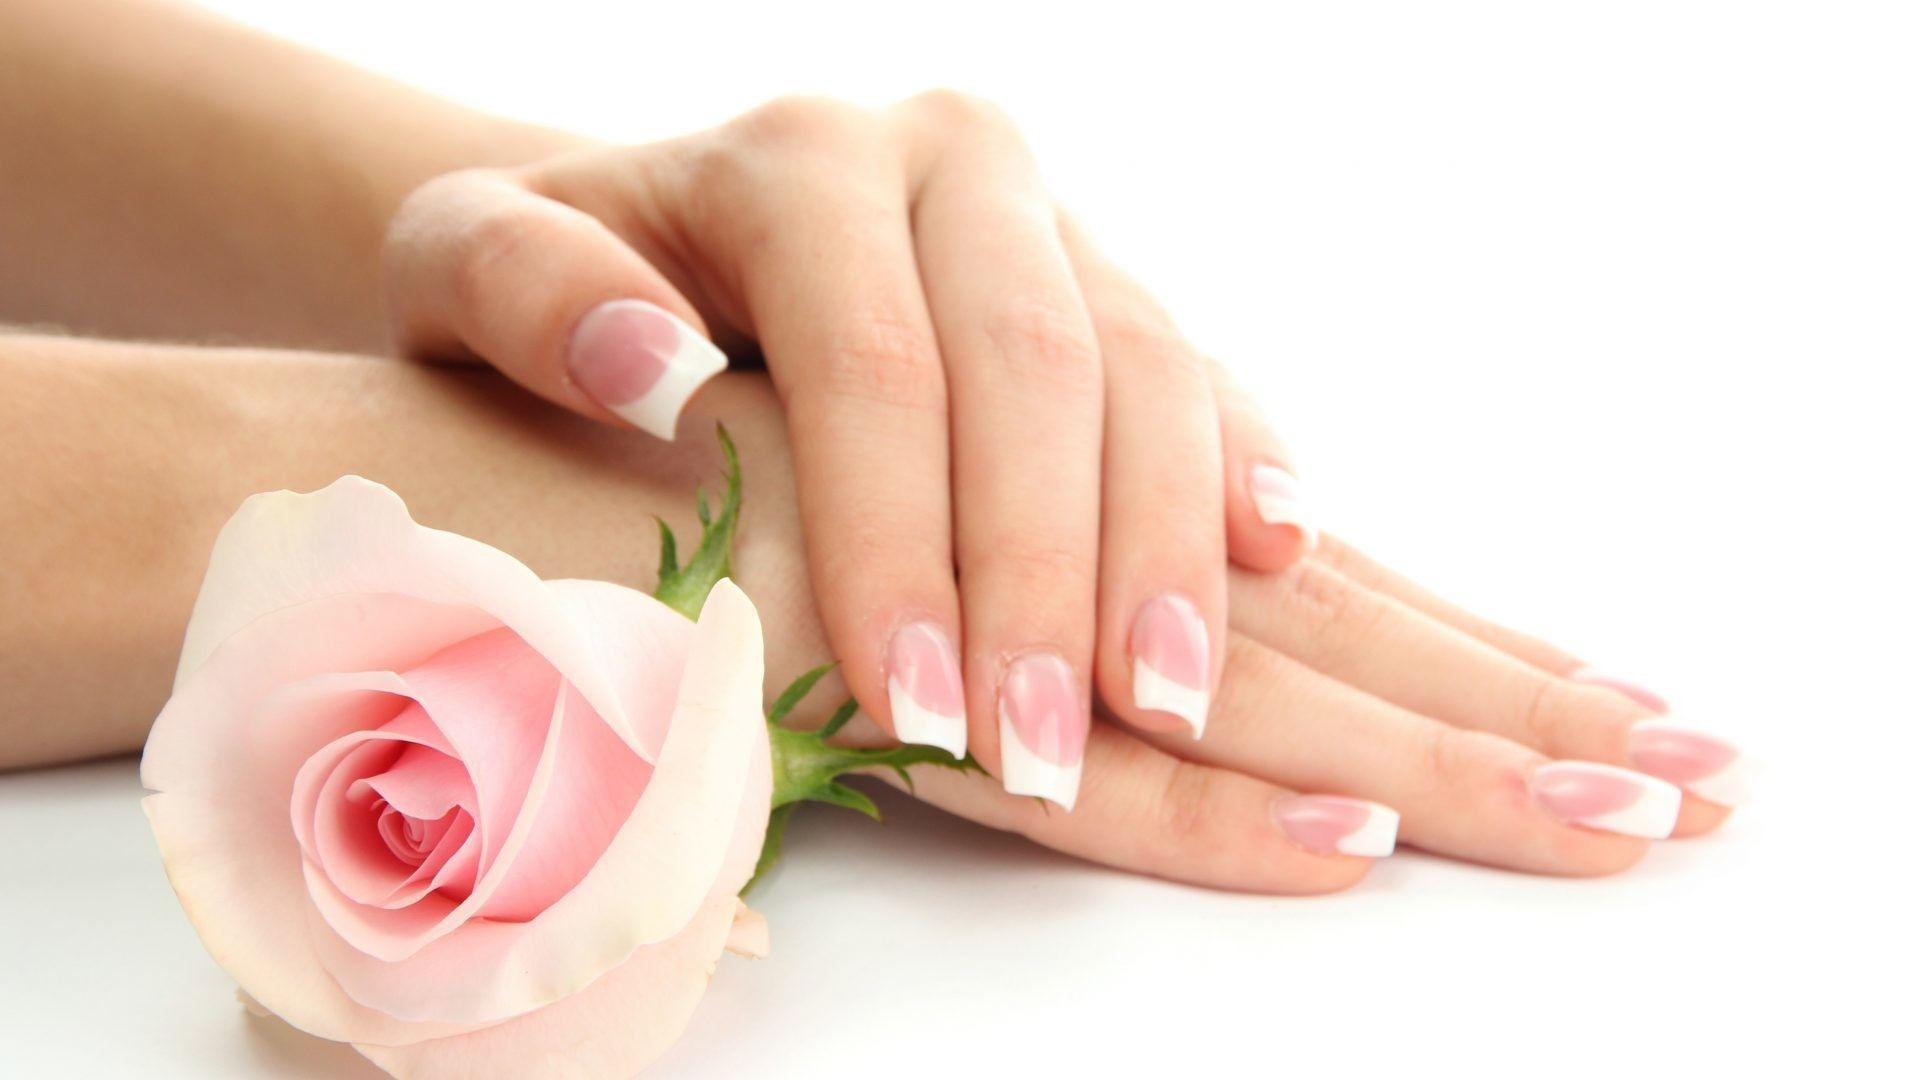 Manicure Wallpapers - Top Free Manicure Backgrounds ...